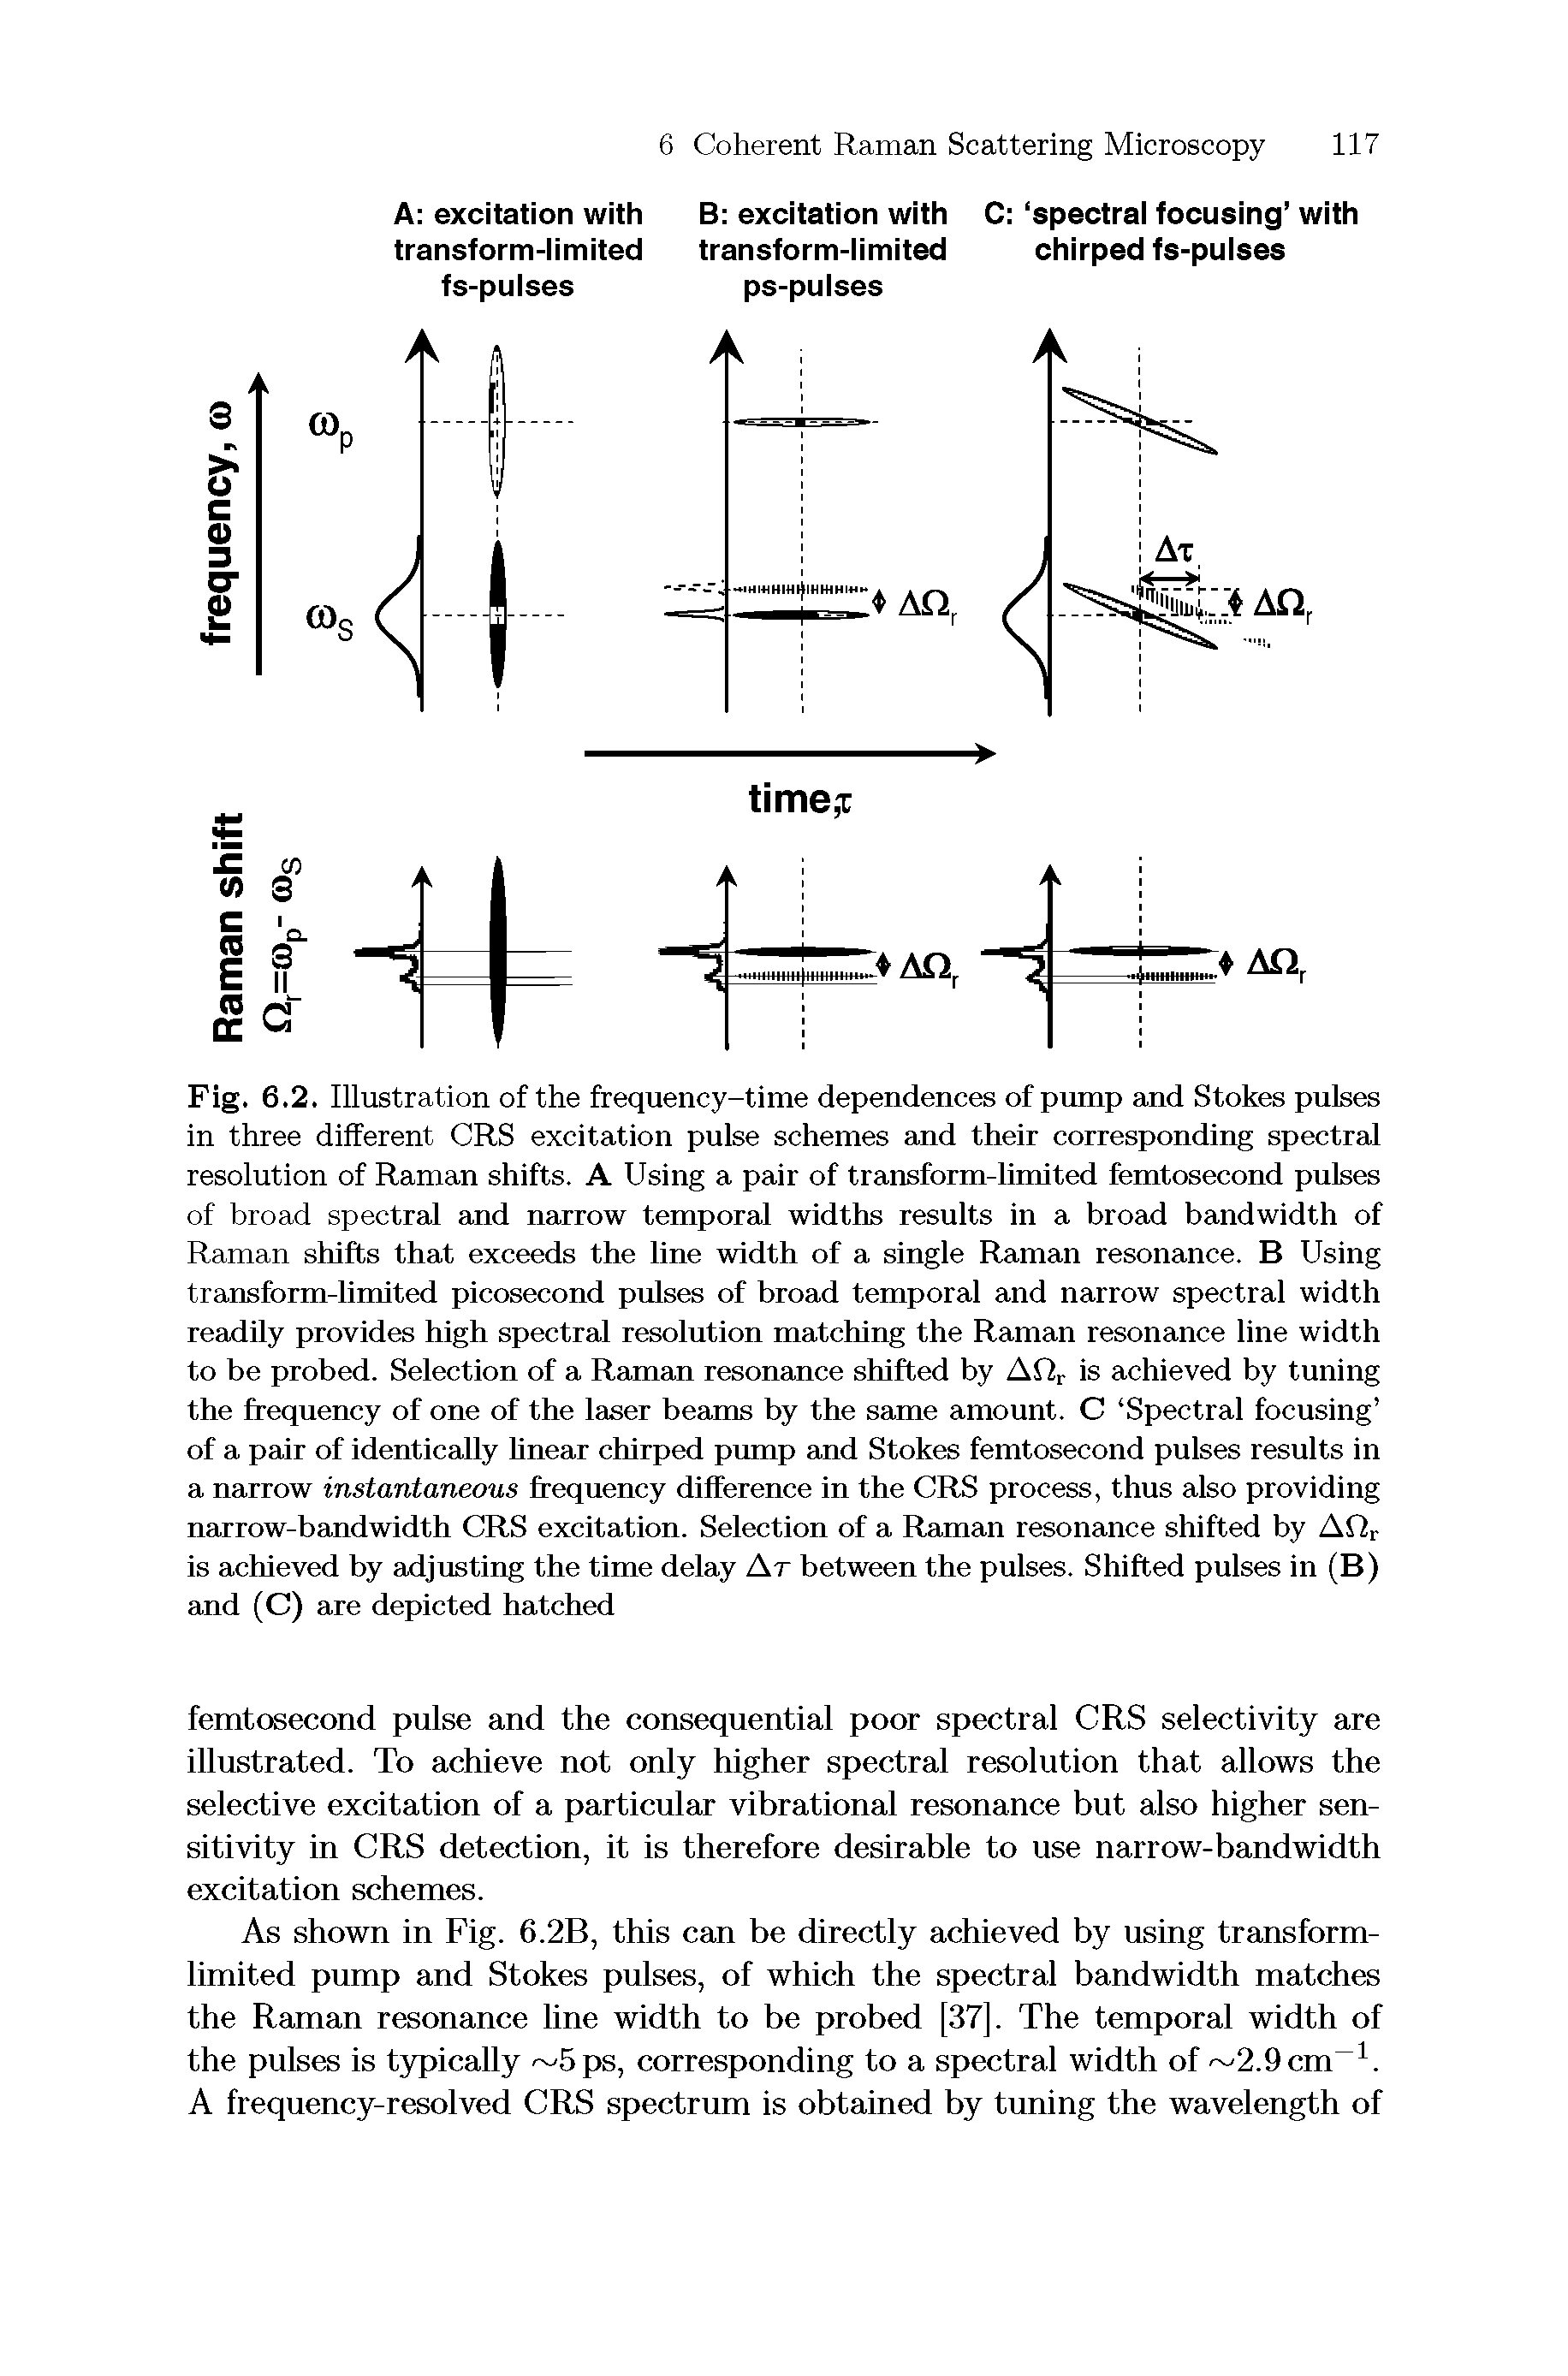 Fig. 6.2. Illustration of the frequency-time dependences of pump and Stokes pulses in three different CRS excitation pulse schemes and their corresponding spectral resolution of Raman shifts. A Using a pair of transform-limited femtosecond pulses of broad spectral and narrow temporal widths results in a broad bandwidth of Raman shifts that exceeds the line width of a single Raman resonance. B Using transform-limited picosecond pulses of broad temporal and narrow spectral width readily provides high spectral resolution matching the Raman resonance line width to be probed. Selection of a Raman resonance shifted by AQr is achieved by tuning the frequency of one of the laser beams by the same amount. C Spectral focusing of a pair of identically linear chirped pump and Stokes femtosecond pulses results in a narrow instantaneous frequency difference in the CRS process, thus also providing narrow-bandwidth CRS excitation. Selection of a Raman resonance shifted by AQr is achieved by adjusting the time delay At between the pulses. Shifted pulses in (B) and (C) are depicted hatched...